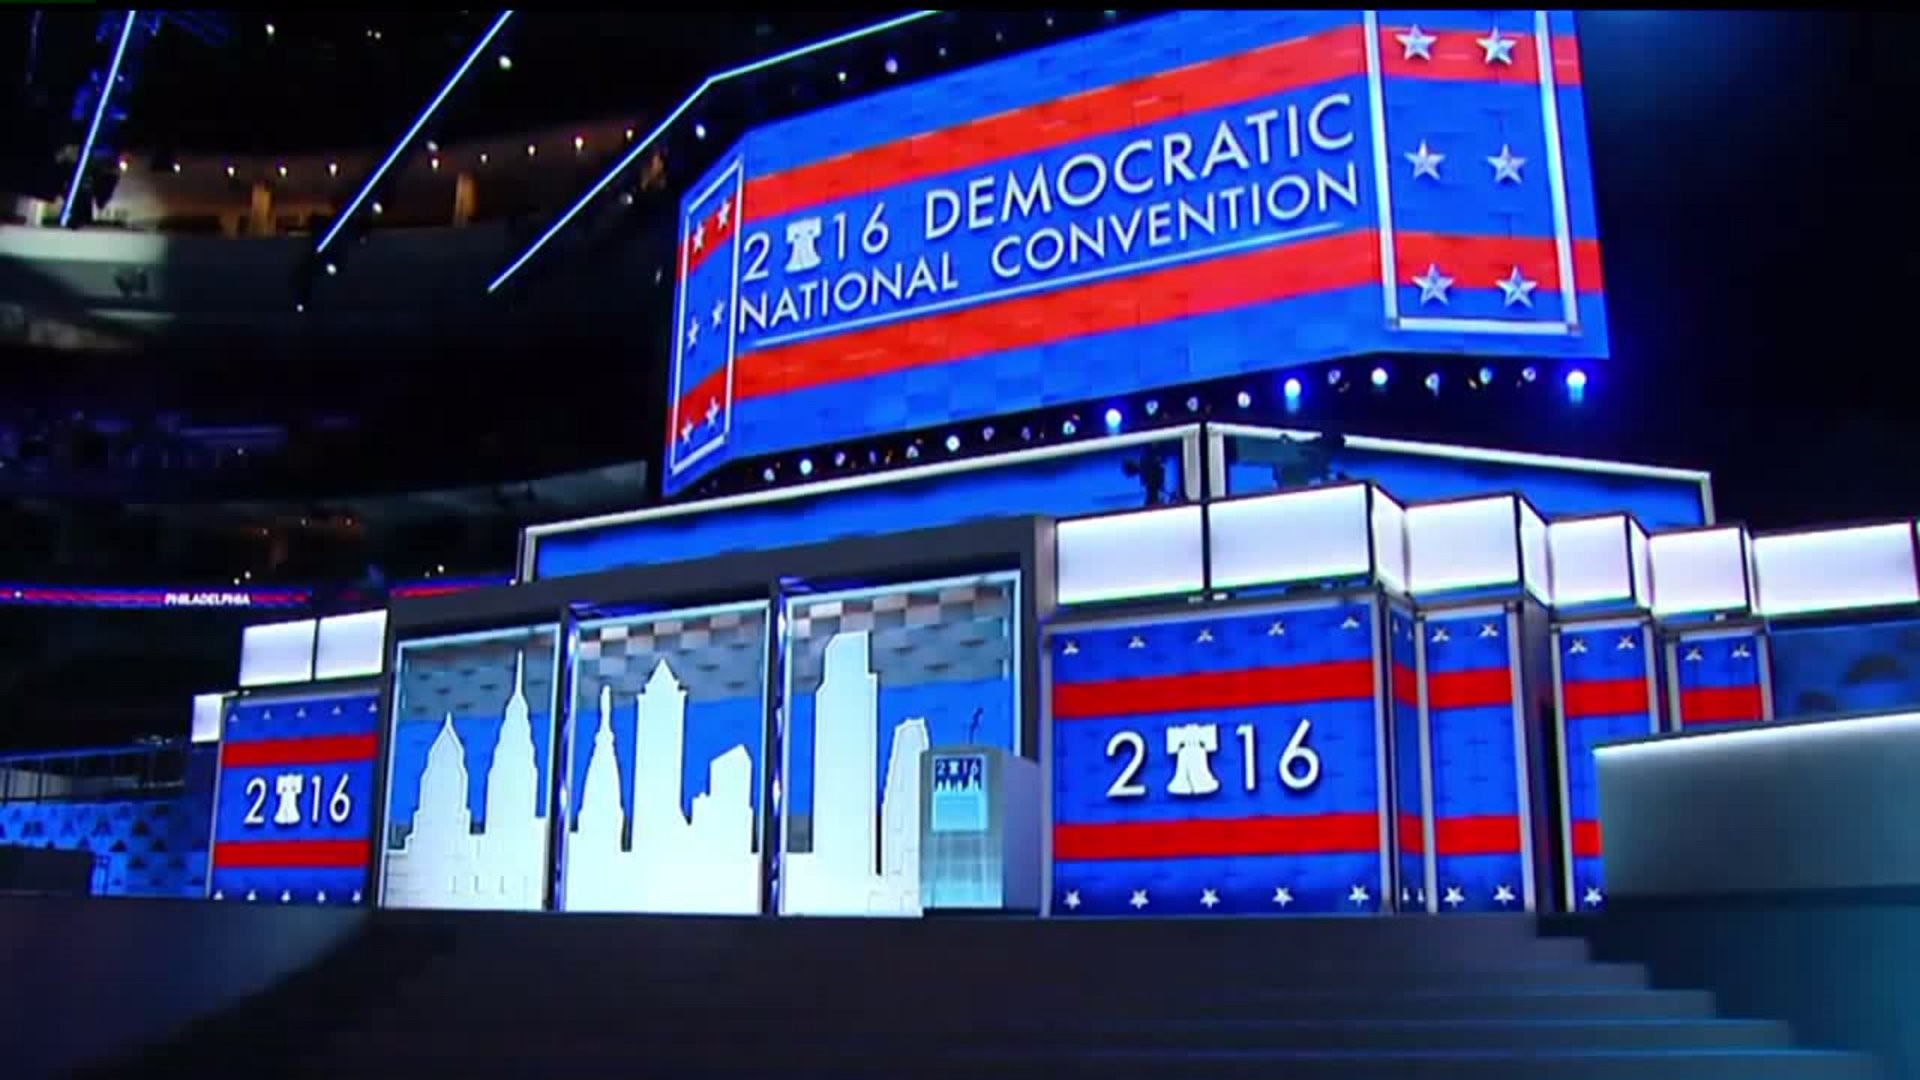 Governor Wolf questions the 2016 DNC grant